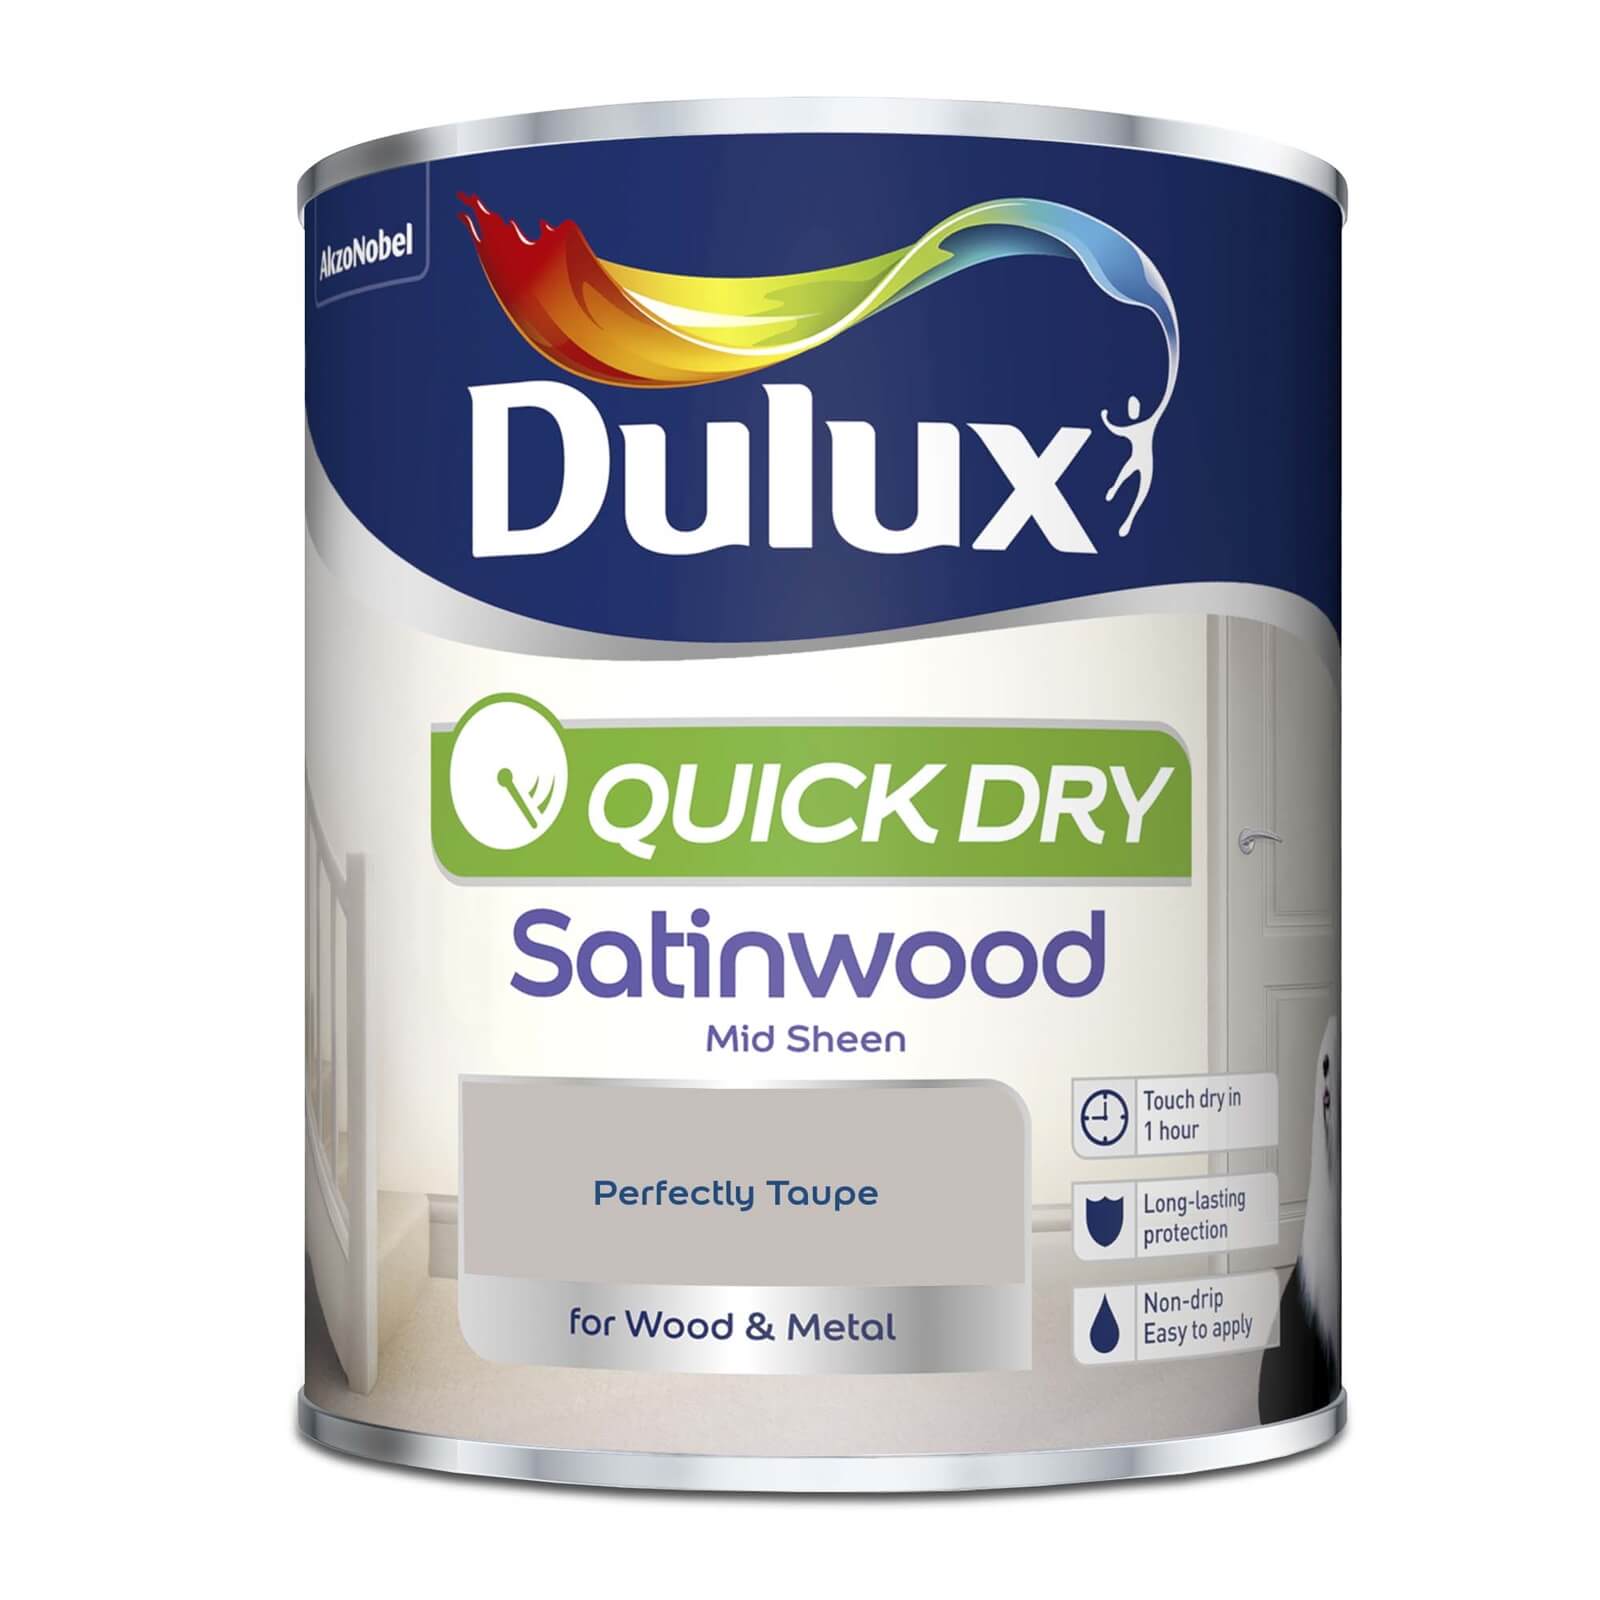 Dulux Quick Dry Satinwood Paint Perfectly Taupe - 750ml